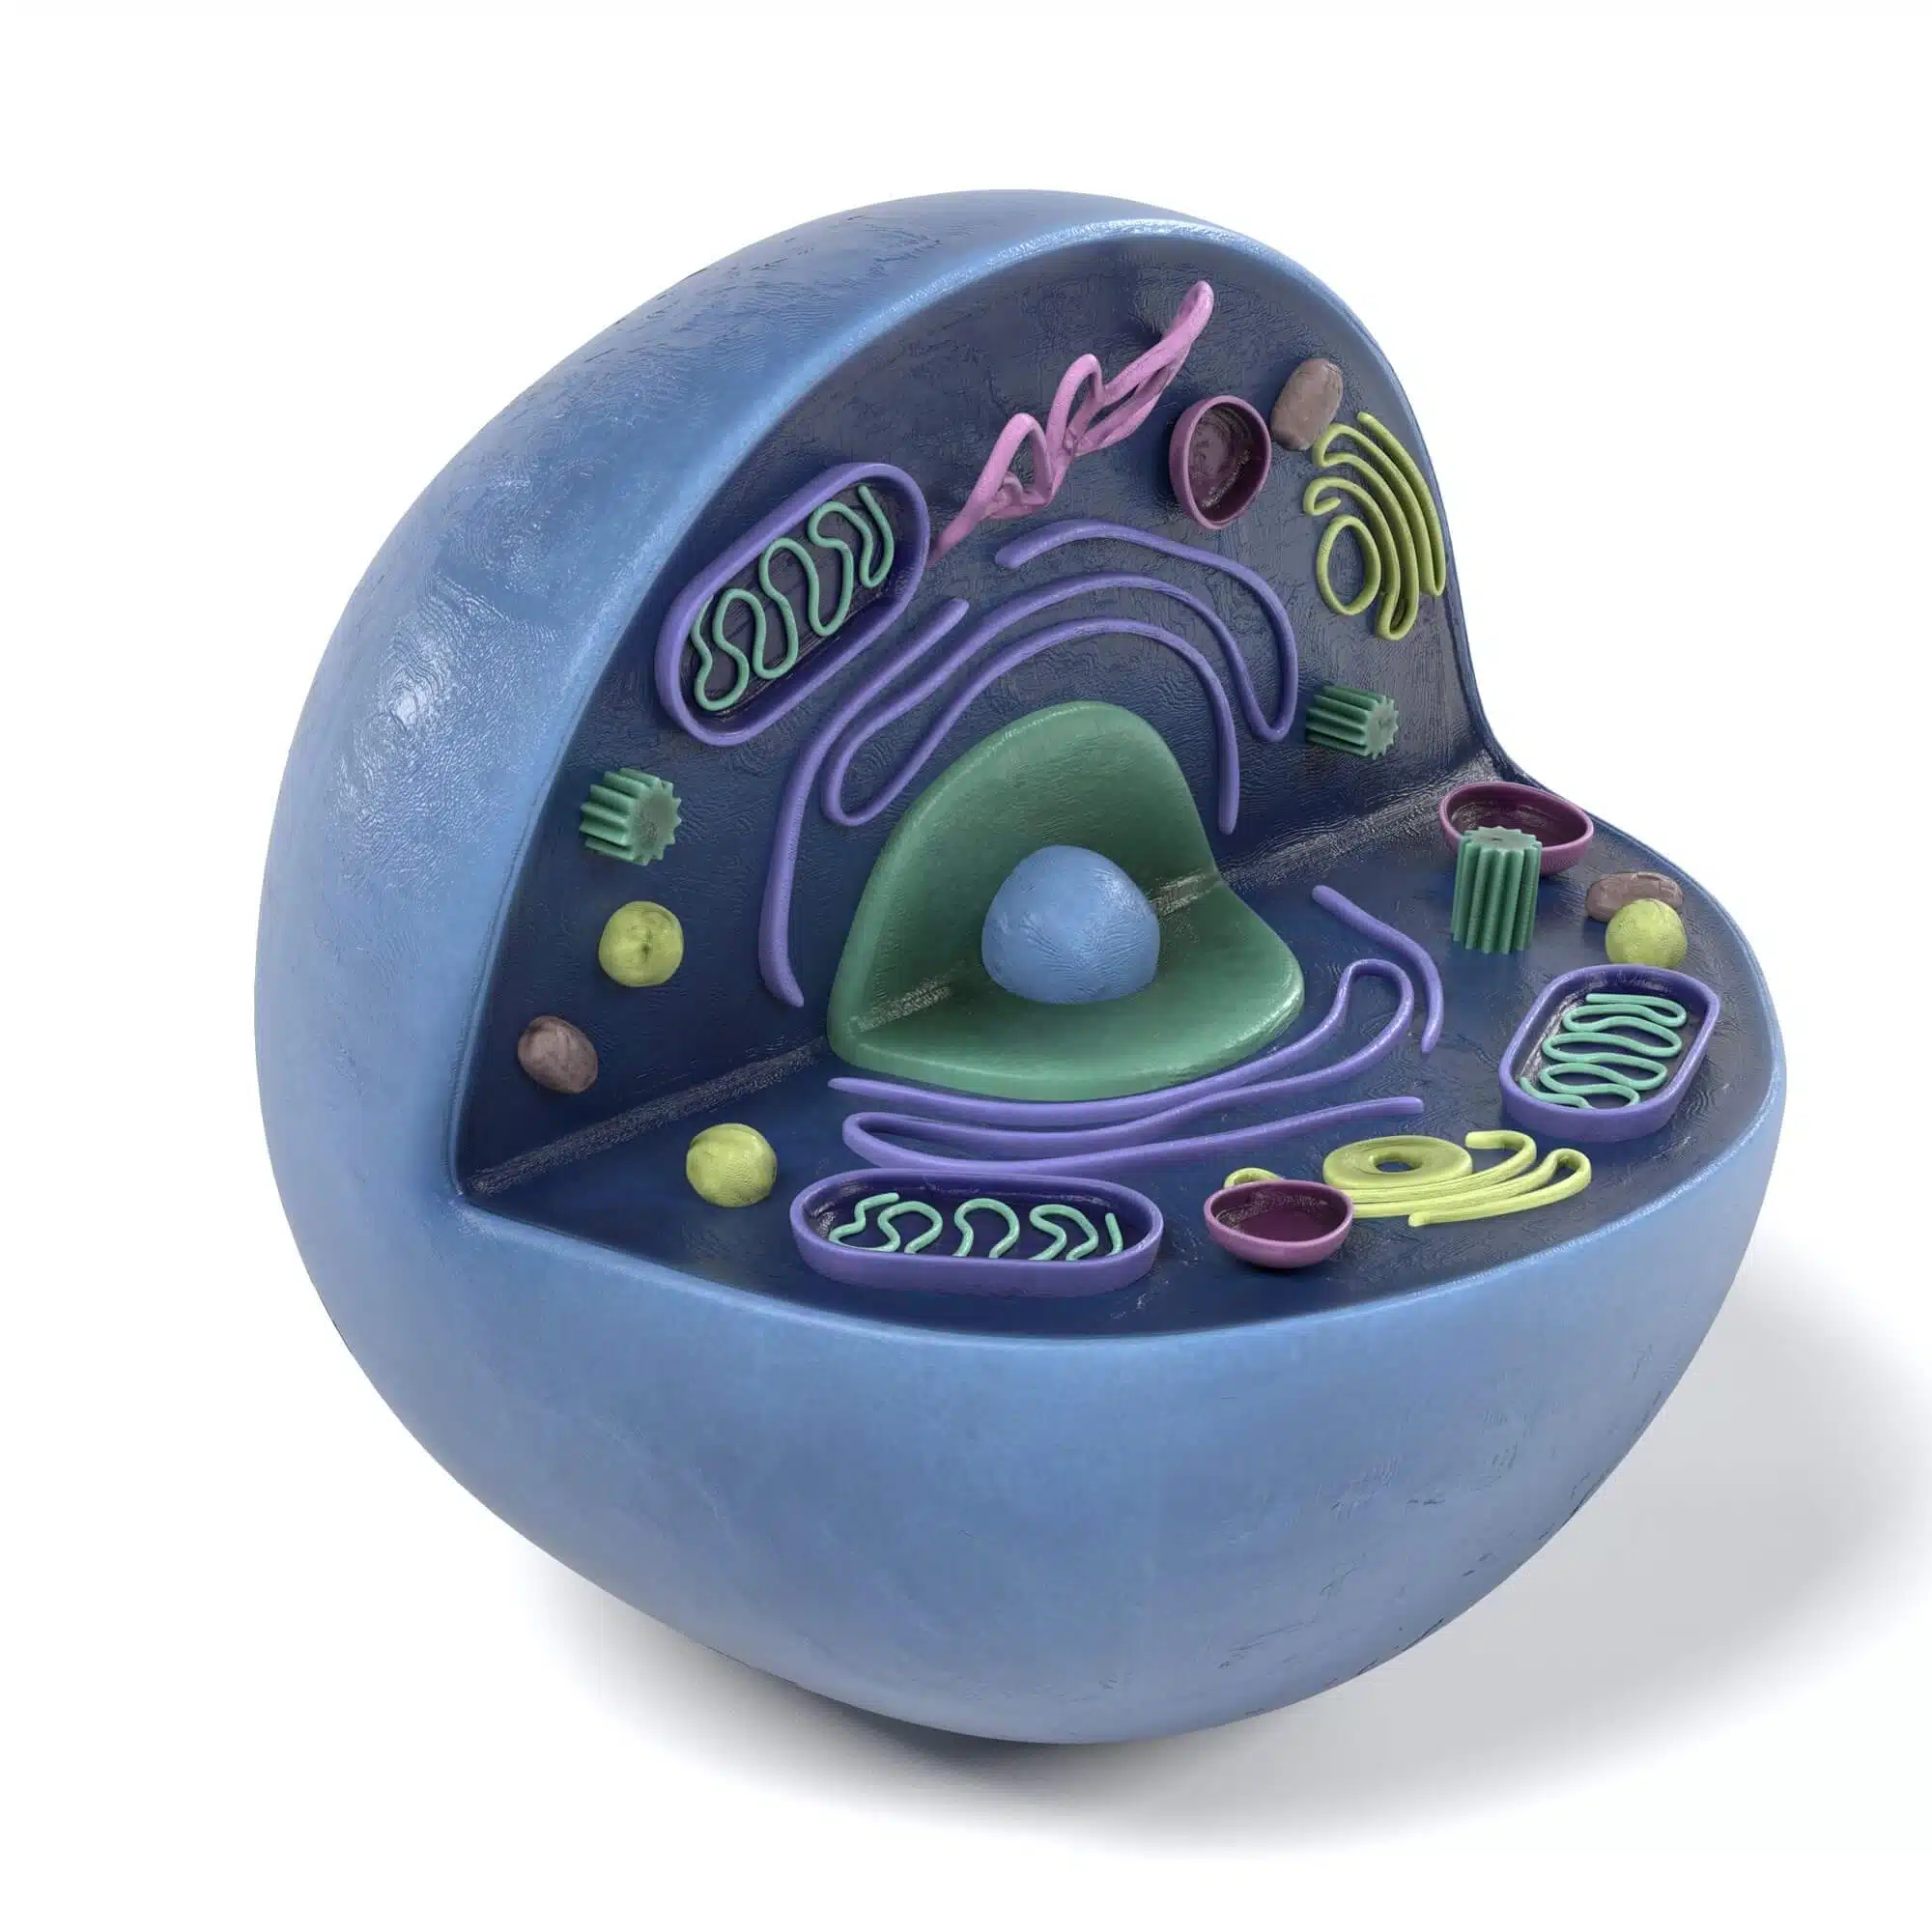 A model of a cell with mitochondria (the green coils) - Illustration Image: depositphotos.com